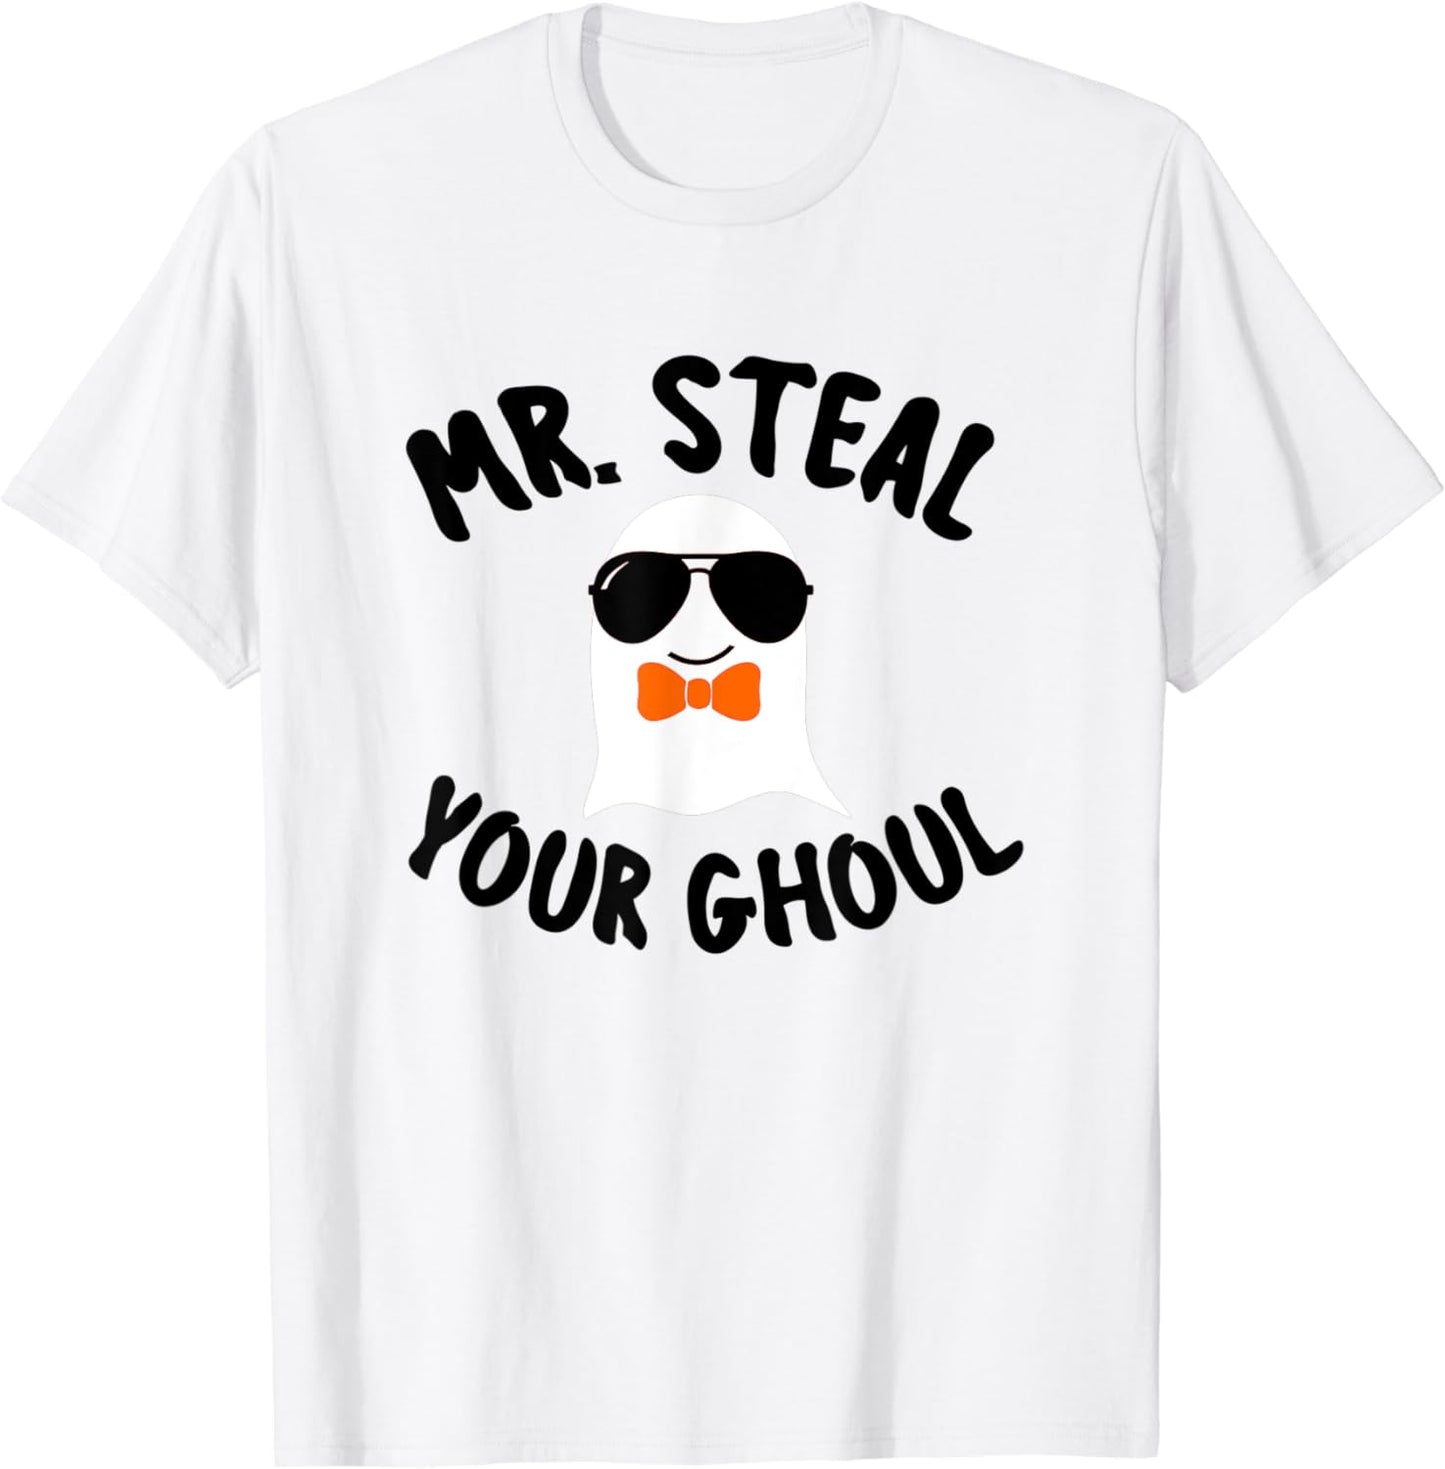 "Spooky and Stylish: Mr. Steal Your Ghoul Ghost Costume Boys Halloween T-Shirt!"